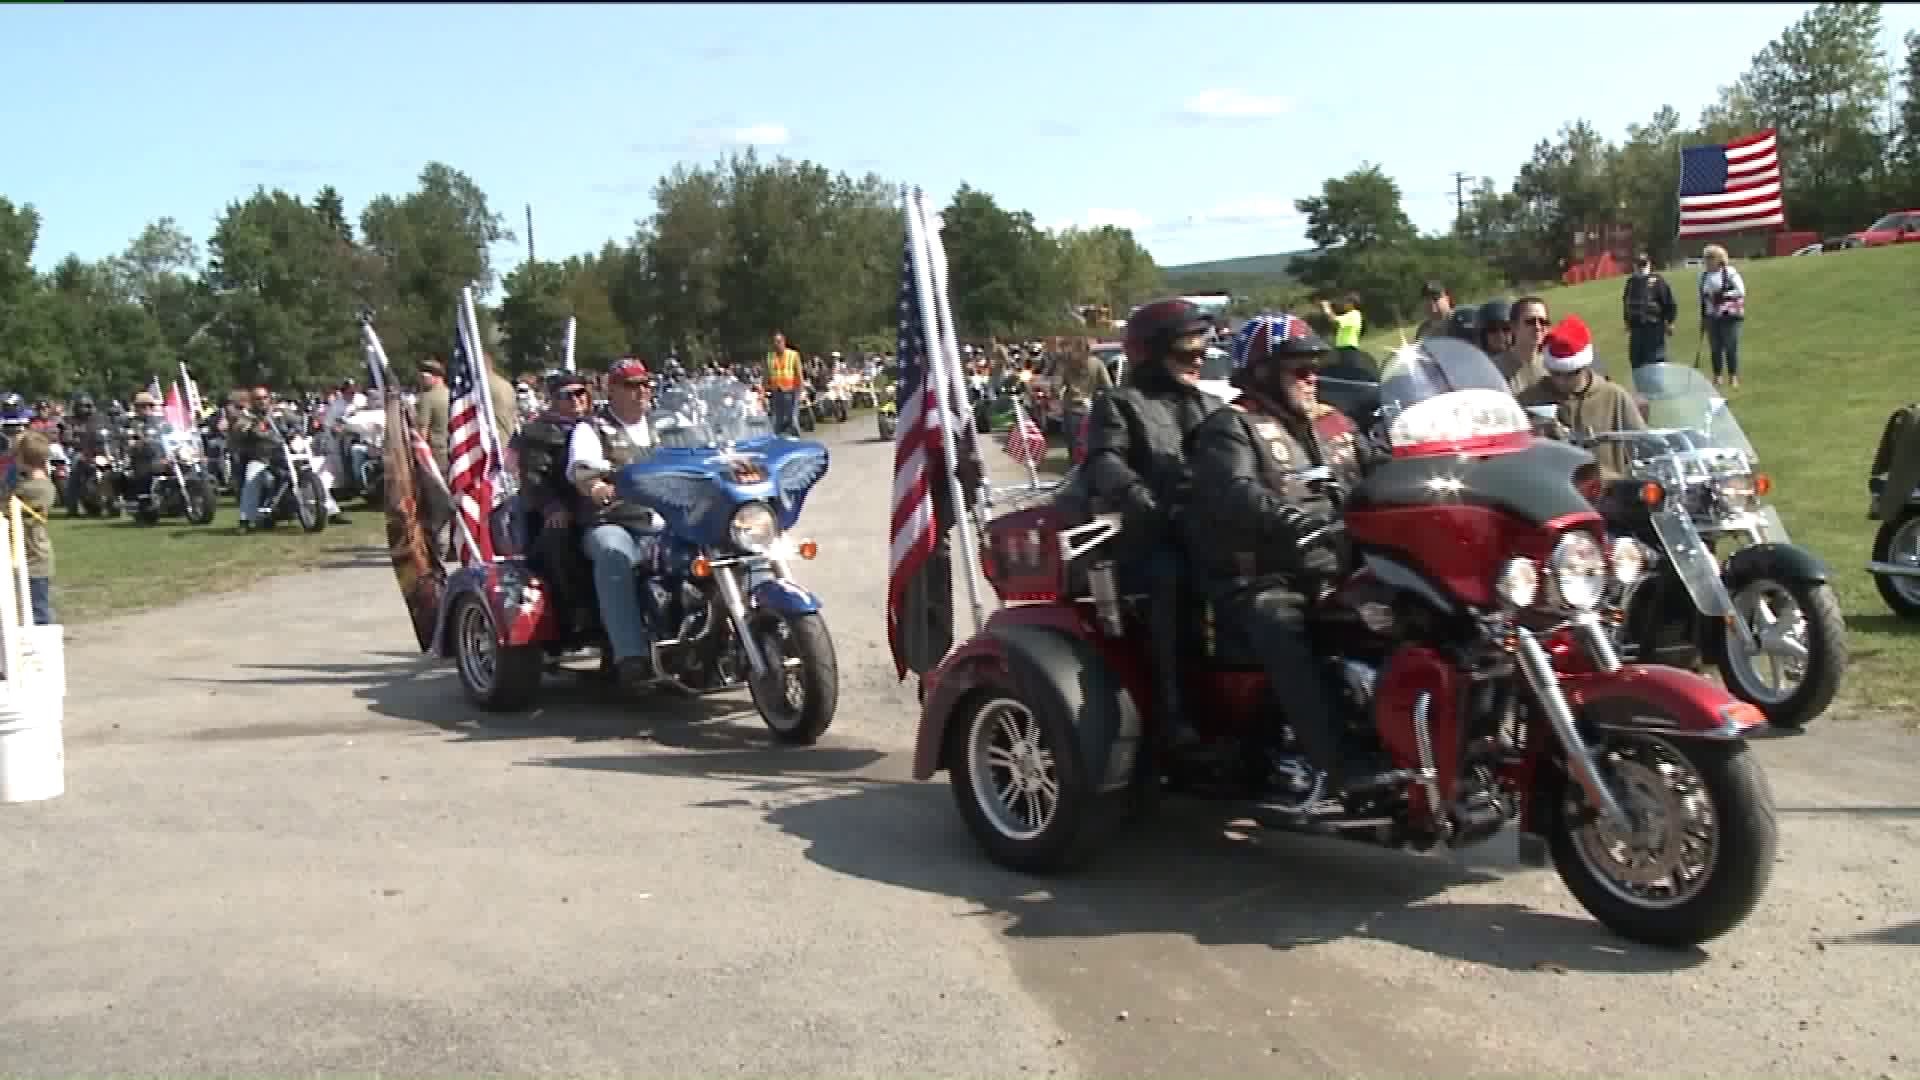 10th Annual Sgt. Jan Michael Argonish Motorcycle Ride